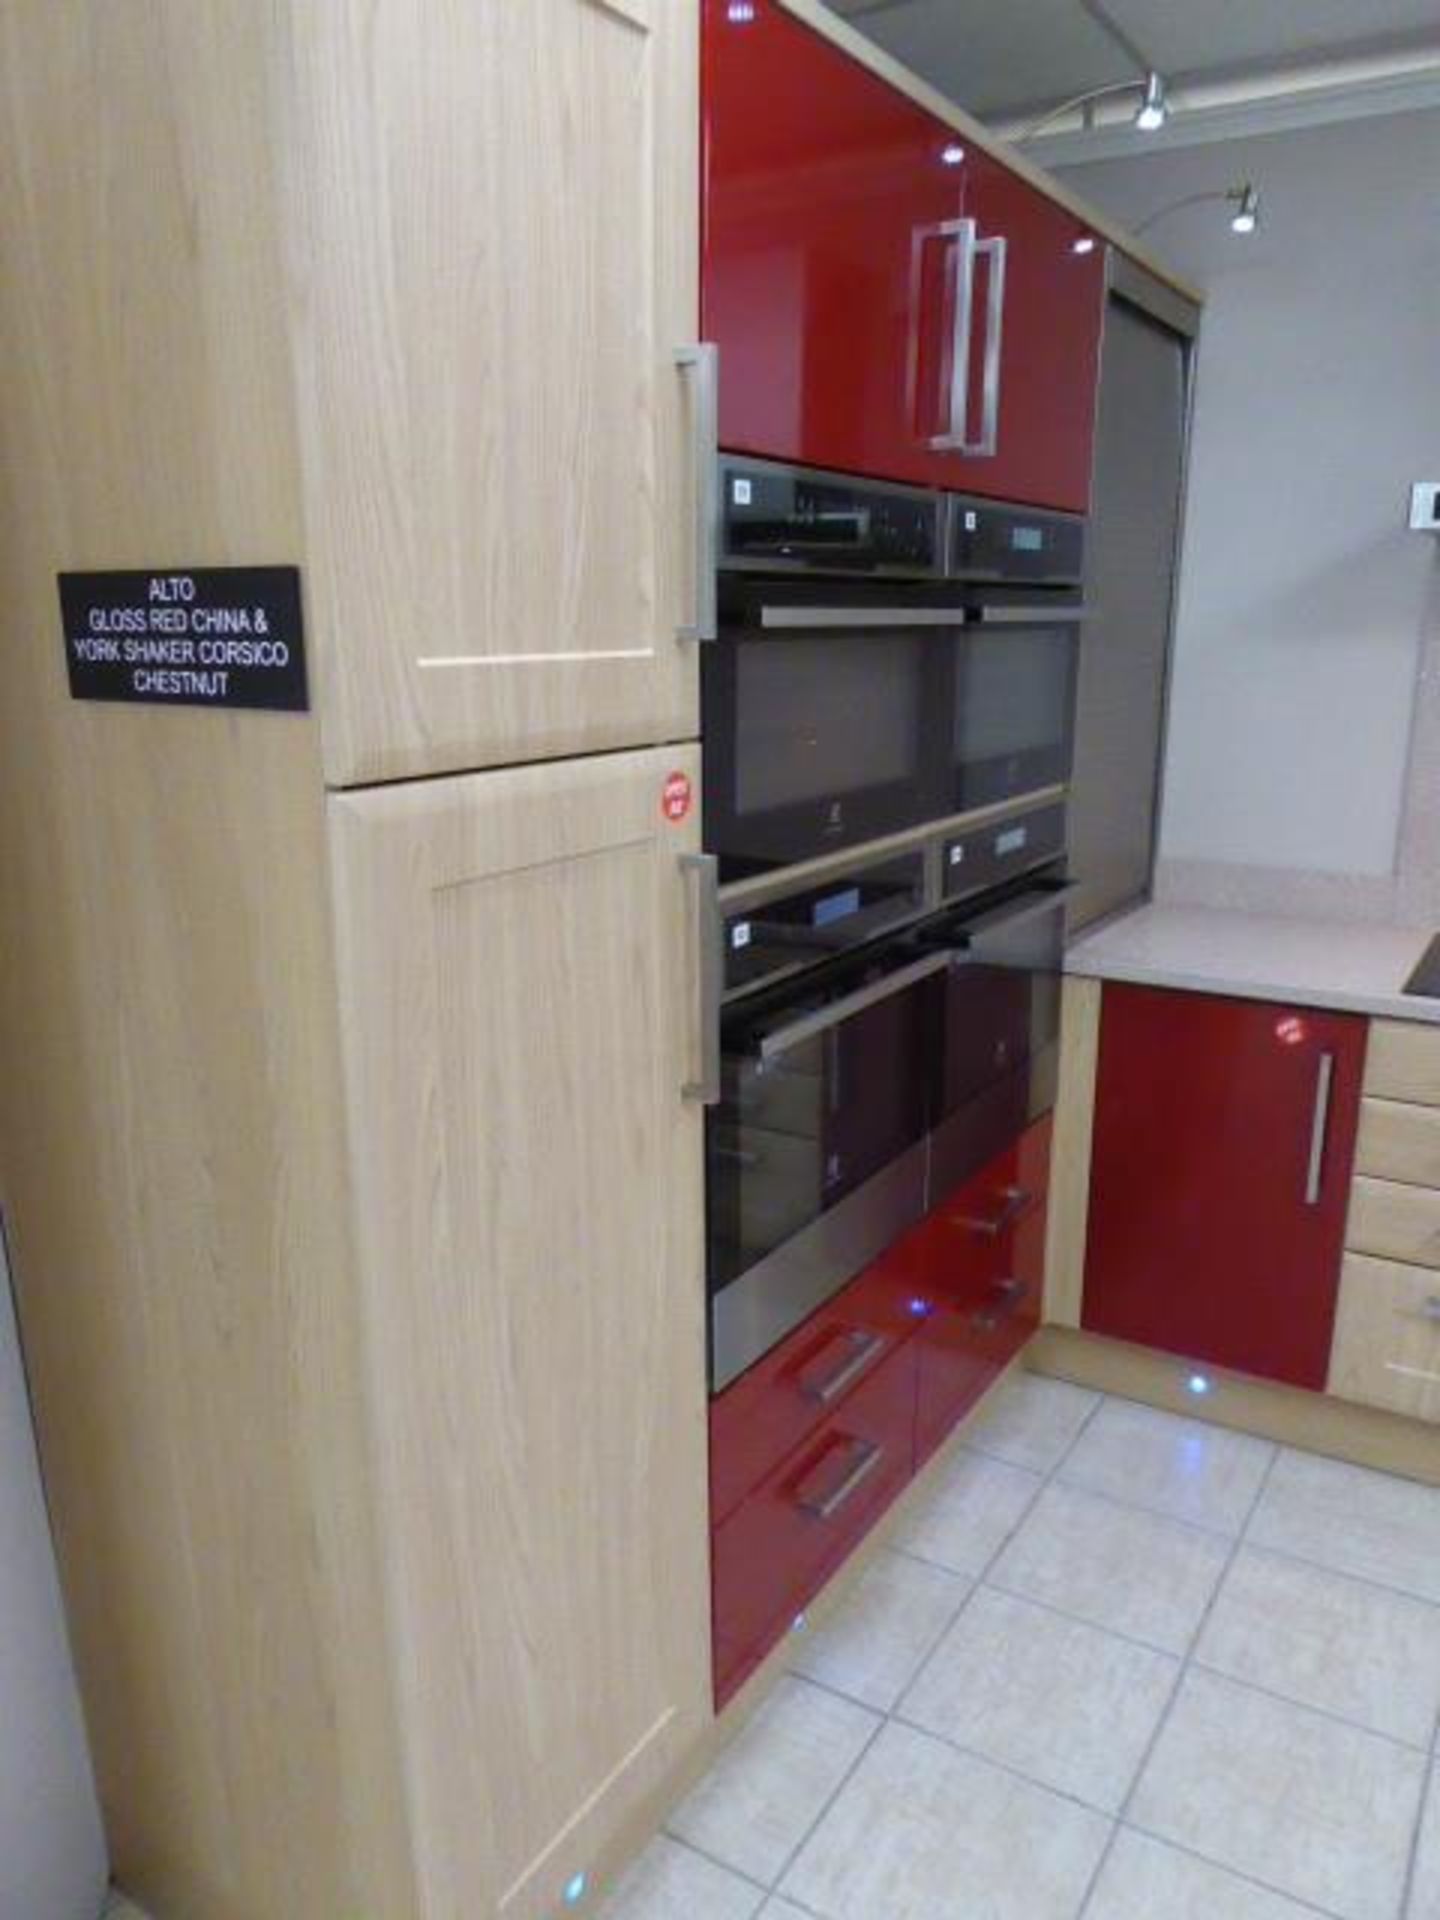 Alto gloss red China and York Shaker Corsico chestnut L-shape kitchen with quartz worktops. Max - Image 4 of 11